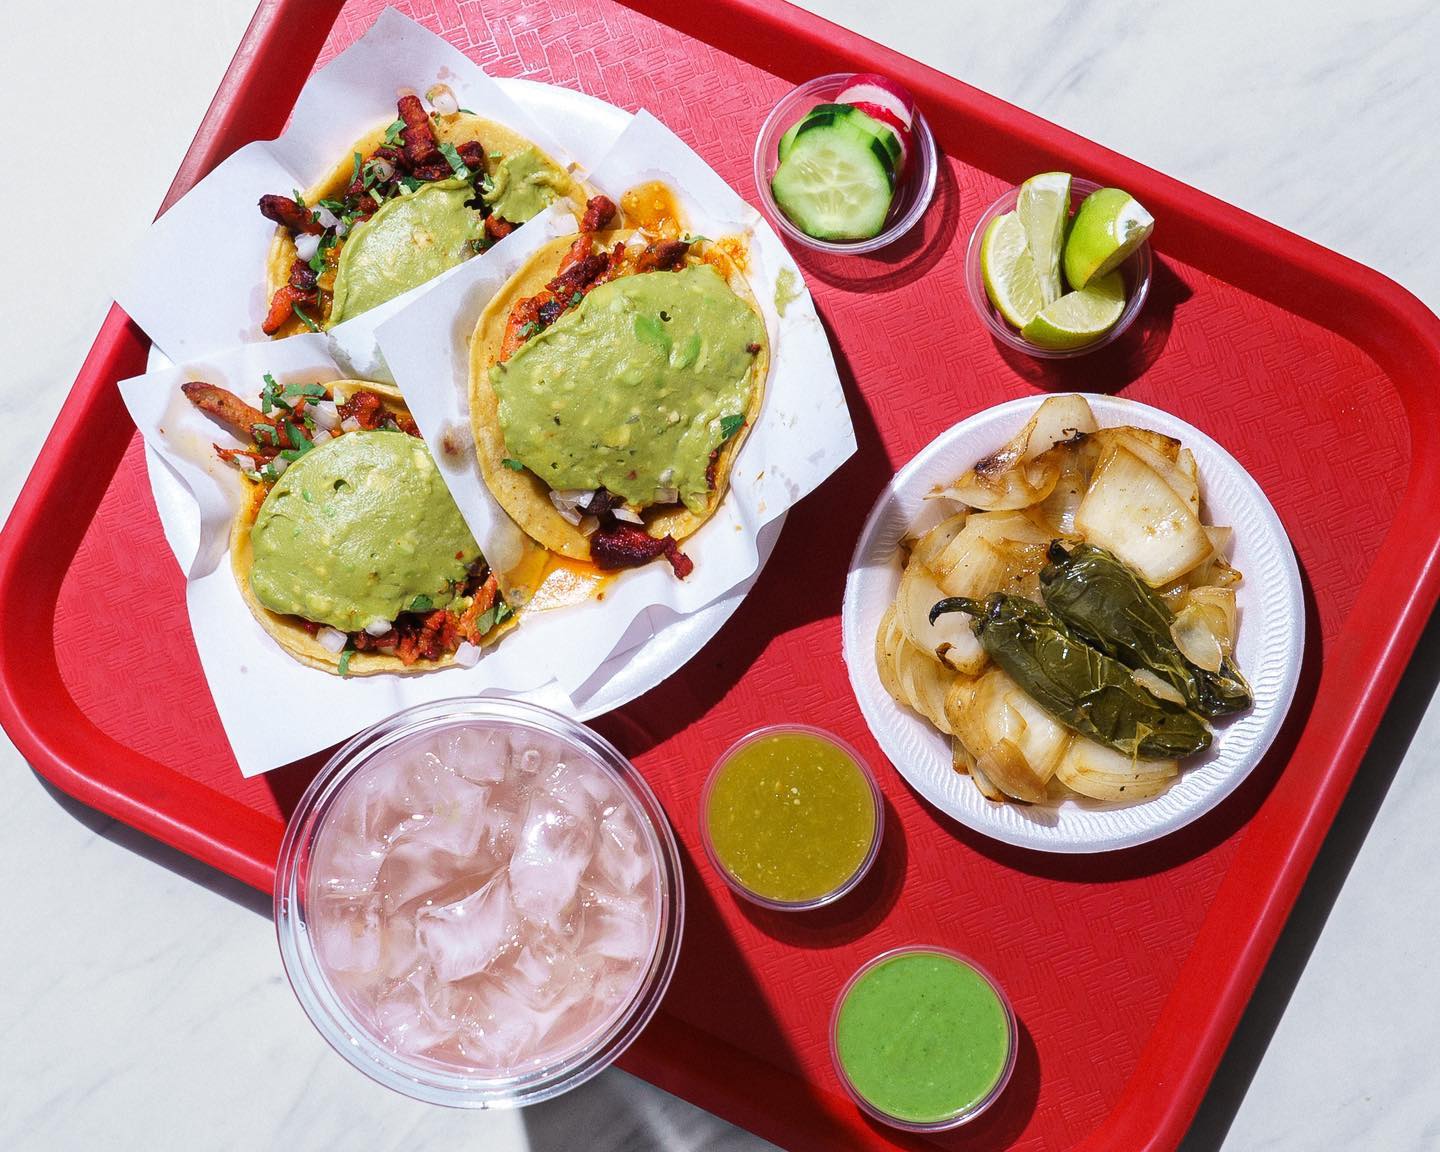 Food and drinks from San Diego taco shop Frida's Taqueria which is opening a new spot in Ramona